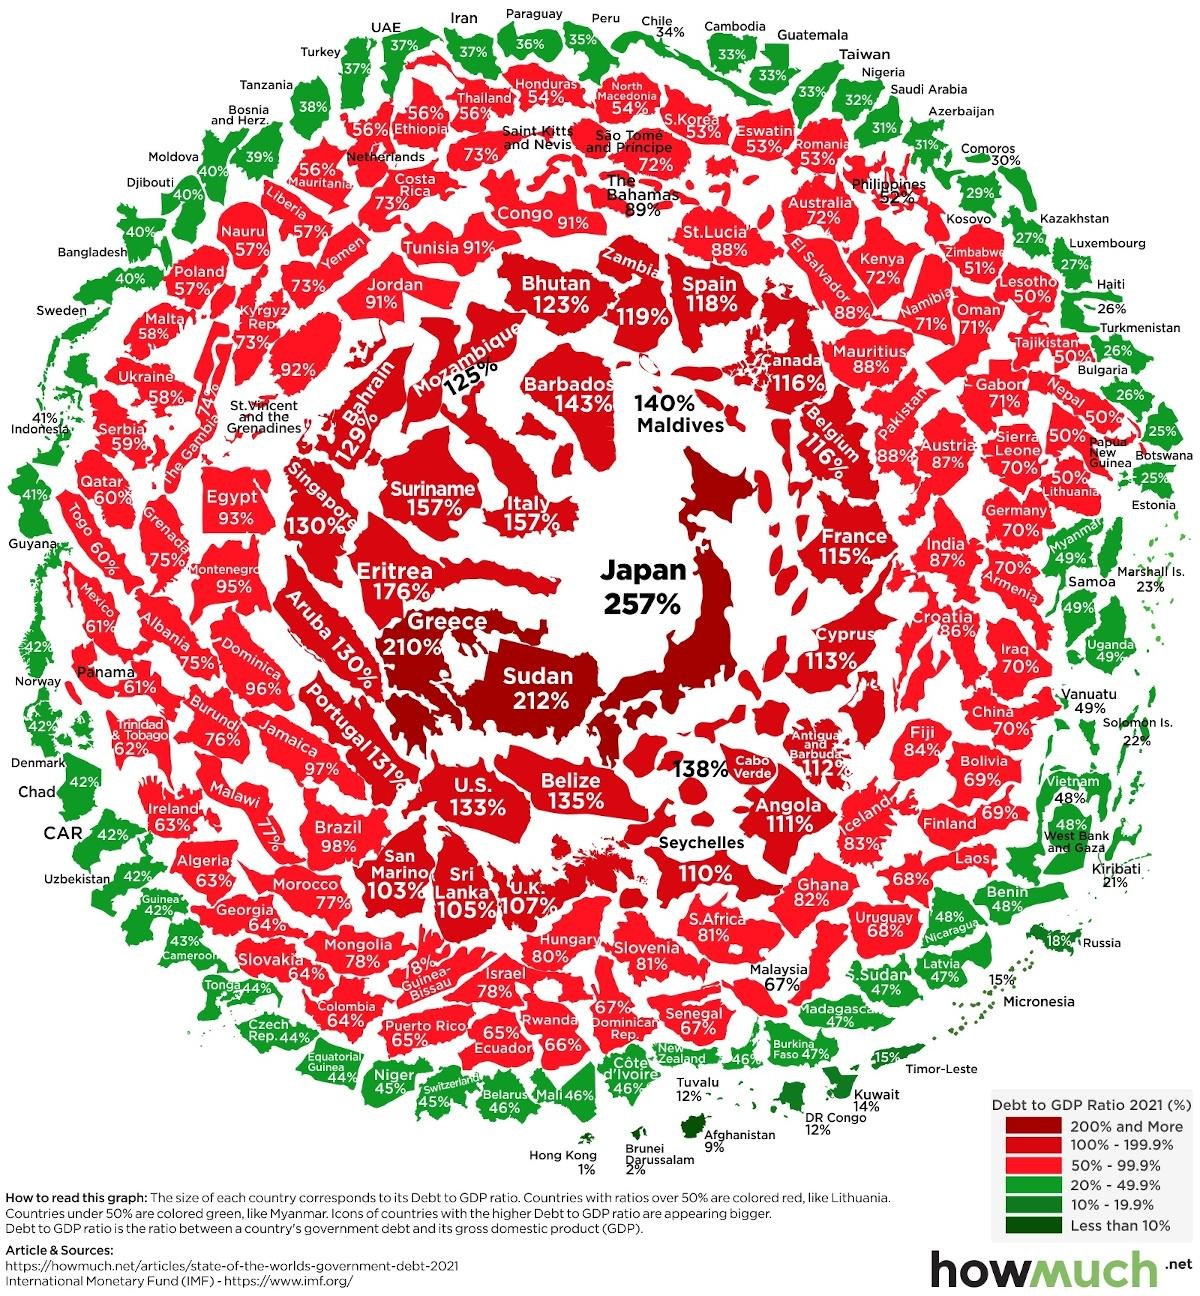 Debt to GDP ratio for all countries in on image